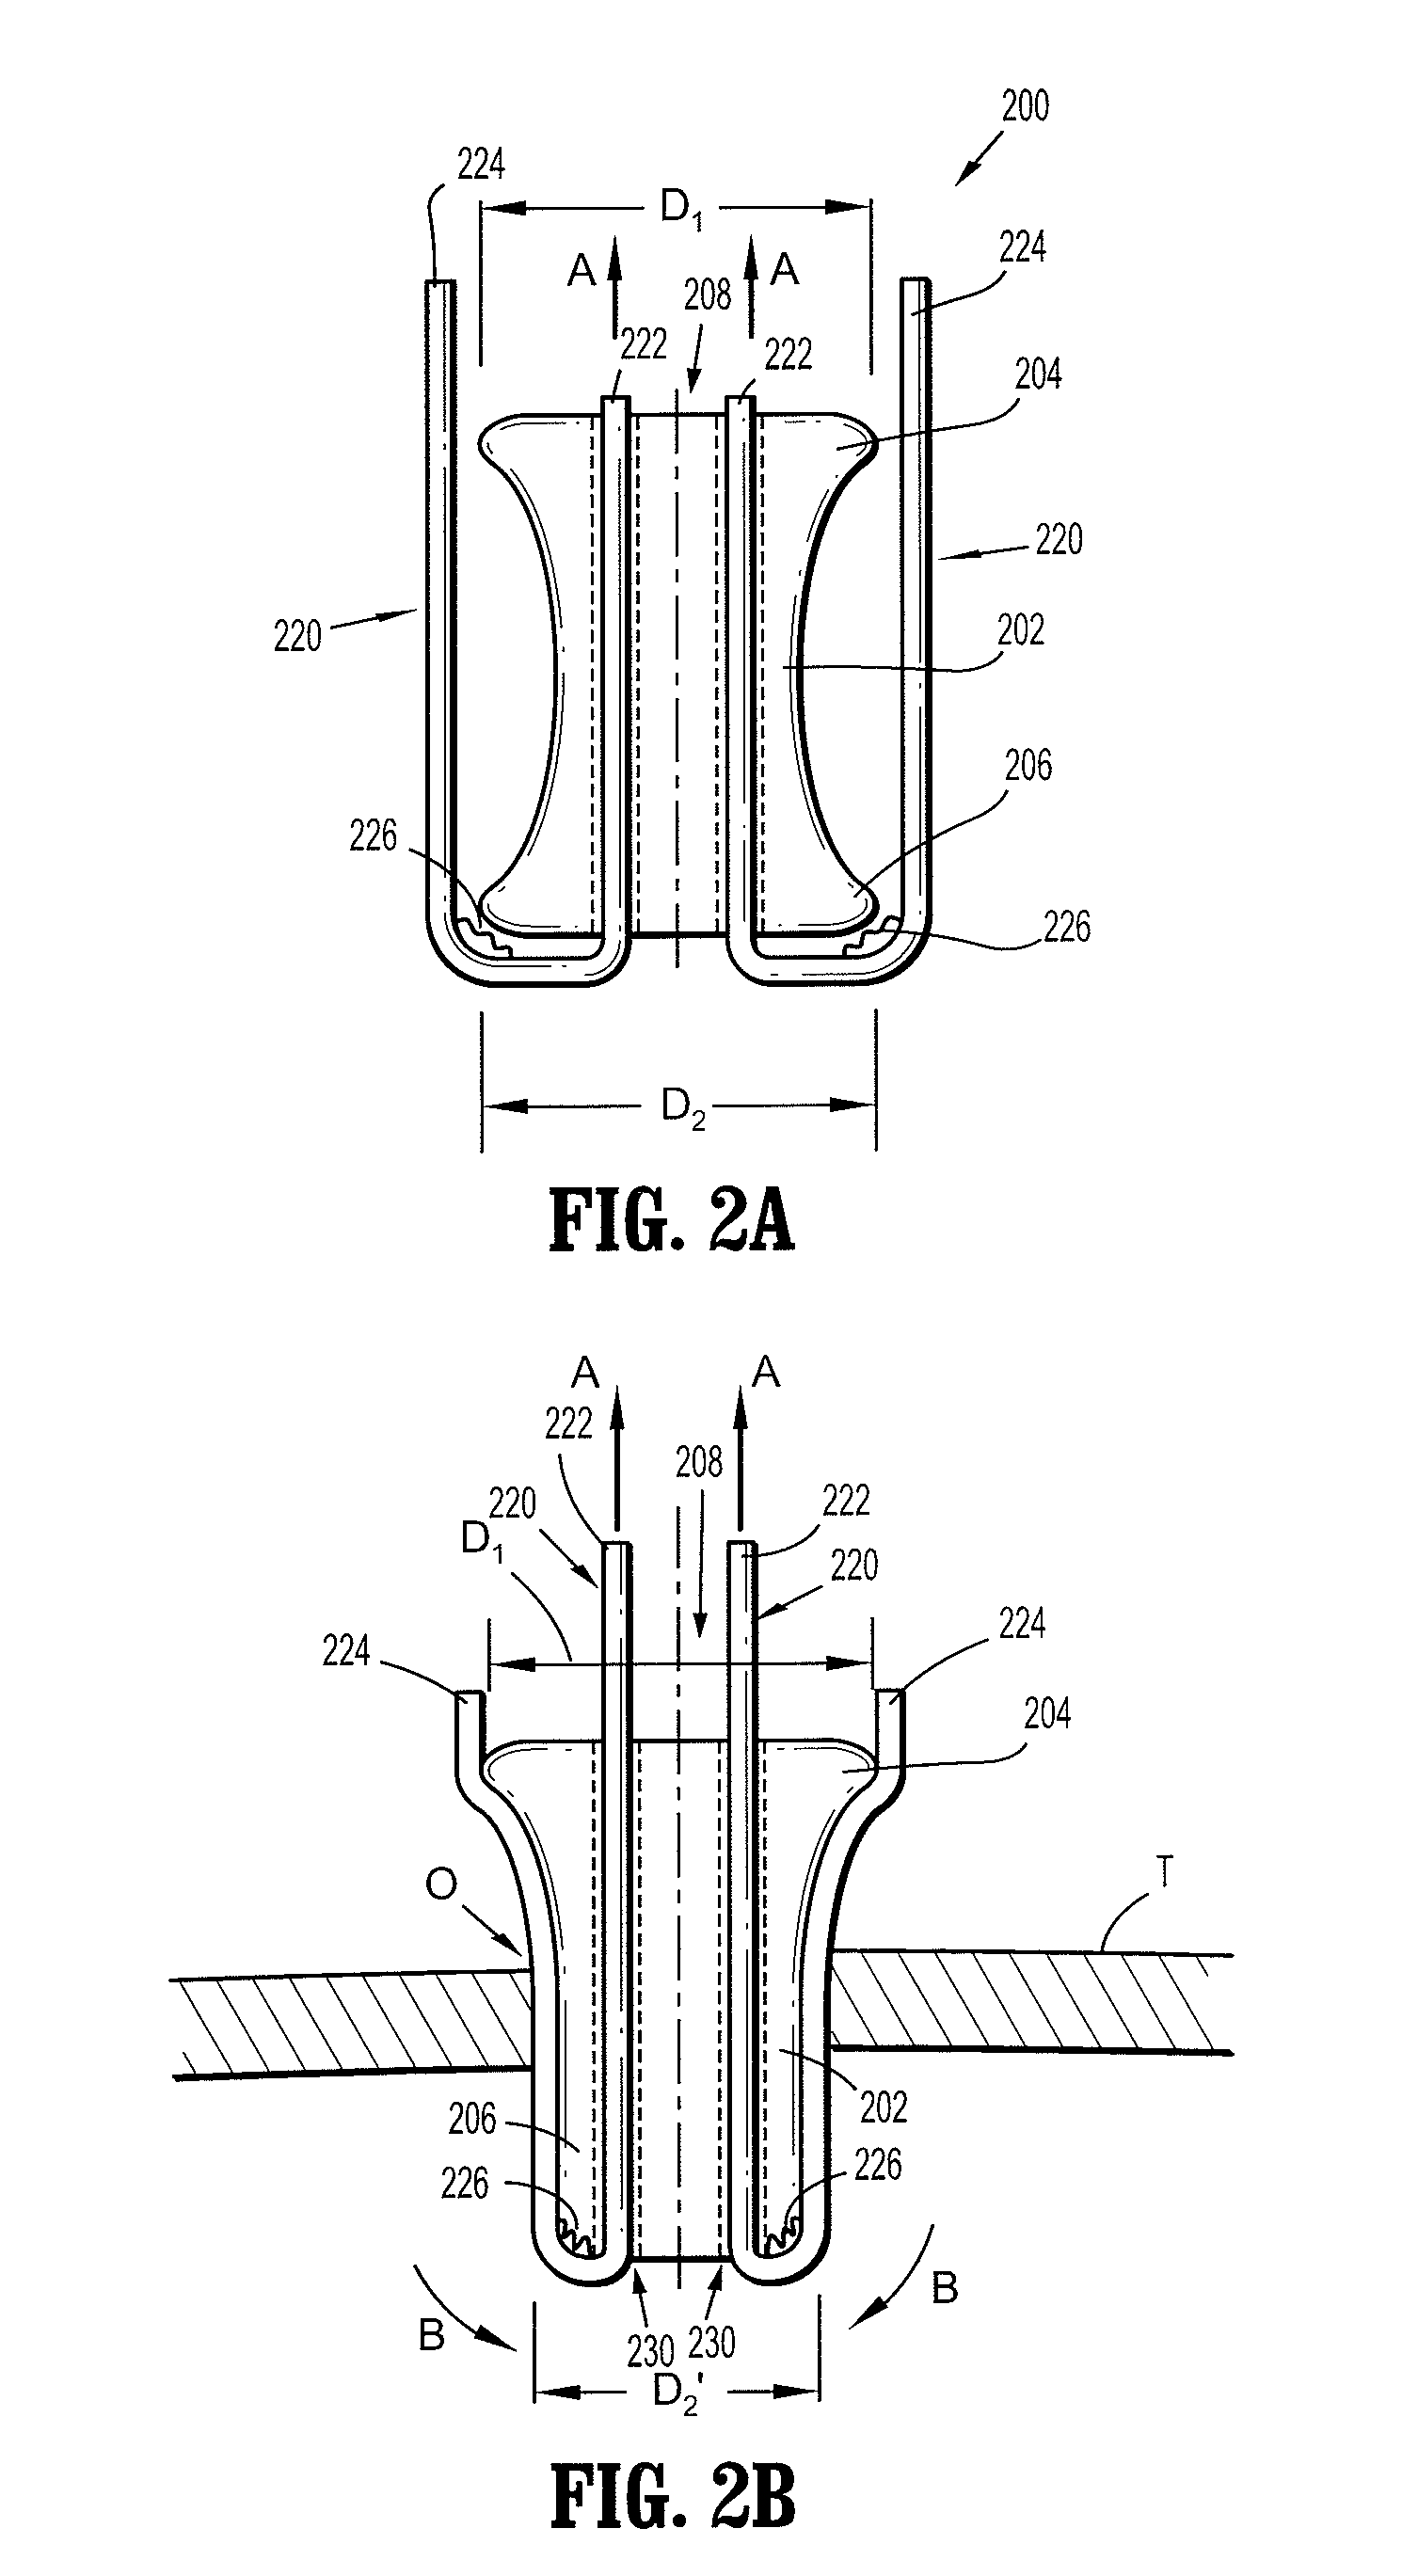 Surgical access port and associated introducer mechanism